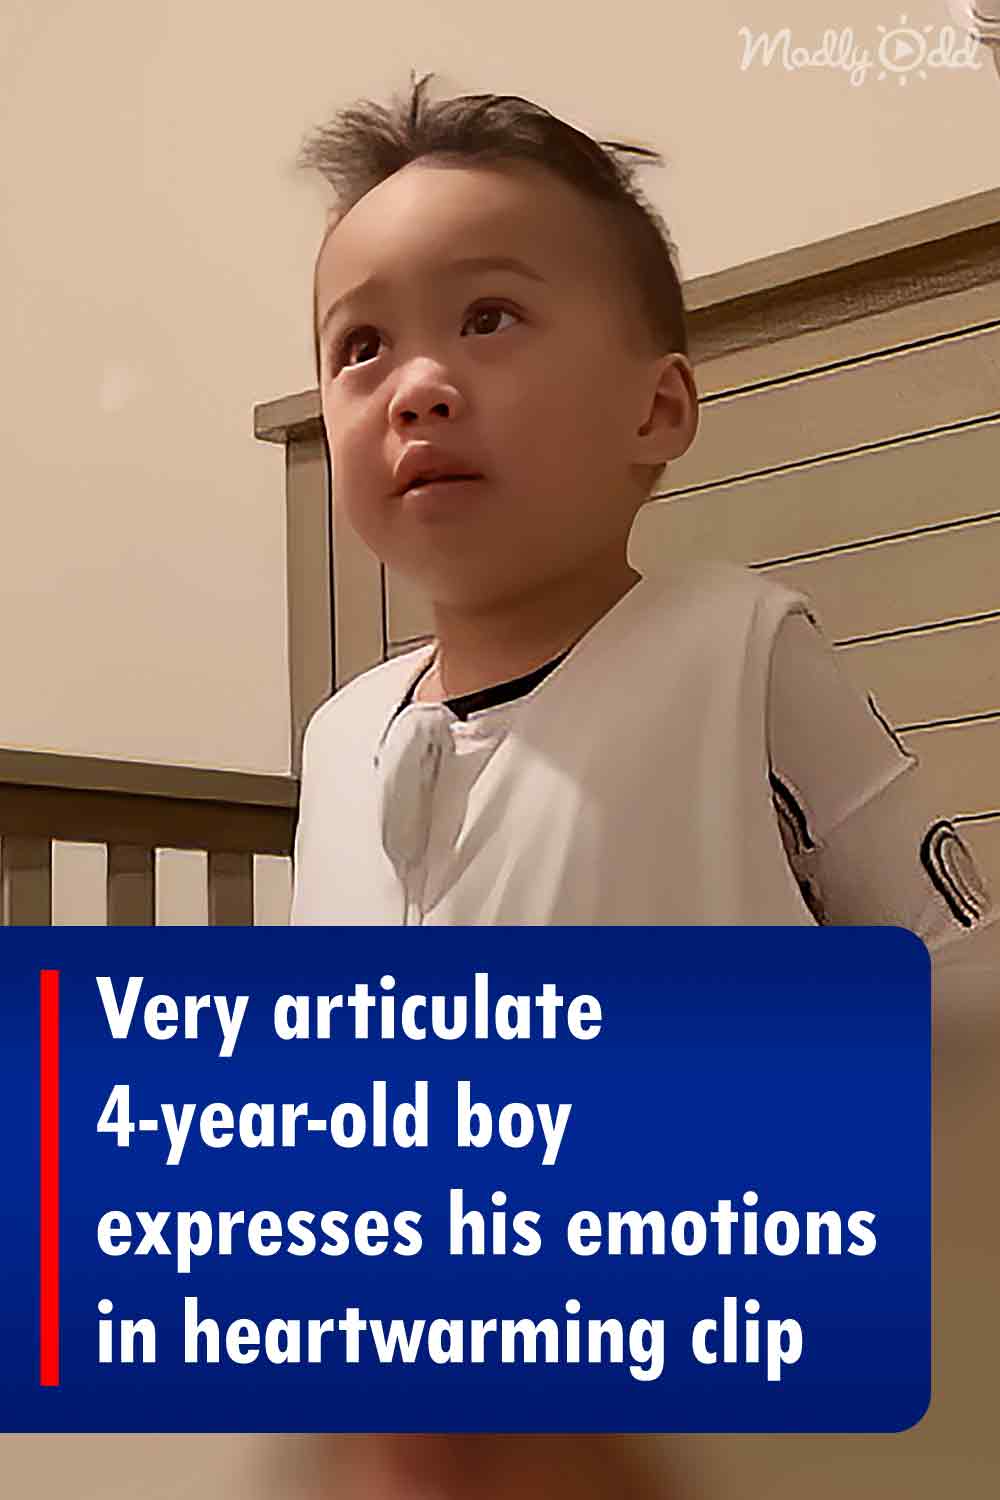 Very articulate 4-year-old boy expresses his emotions in heartwarming clip